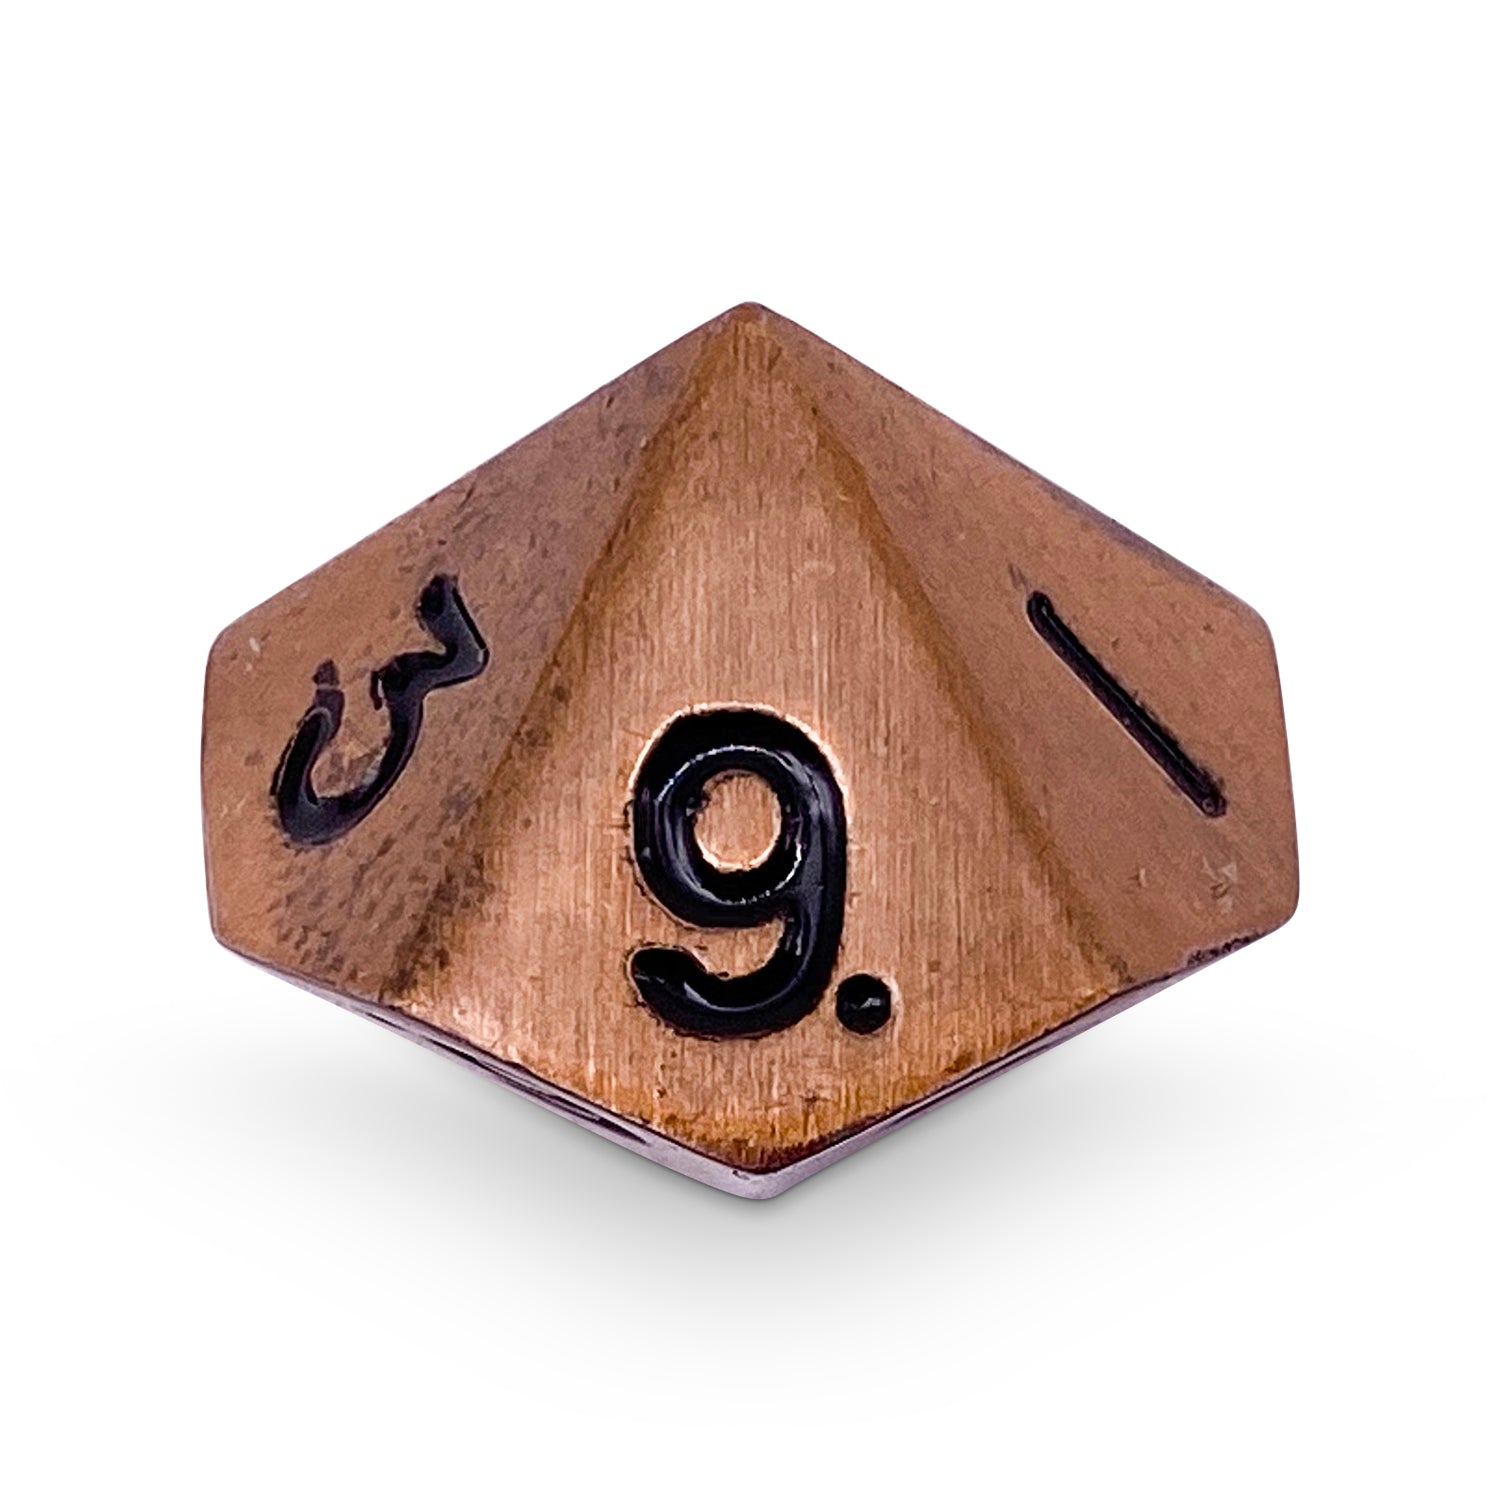 Single Alloy D10 in Gnomish Copper by